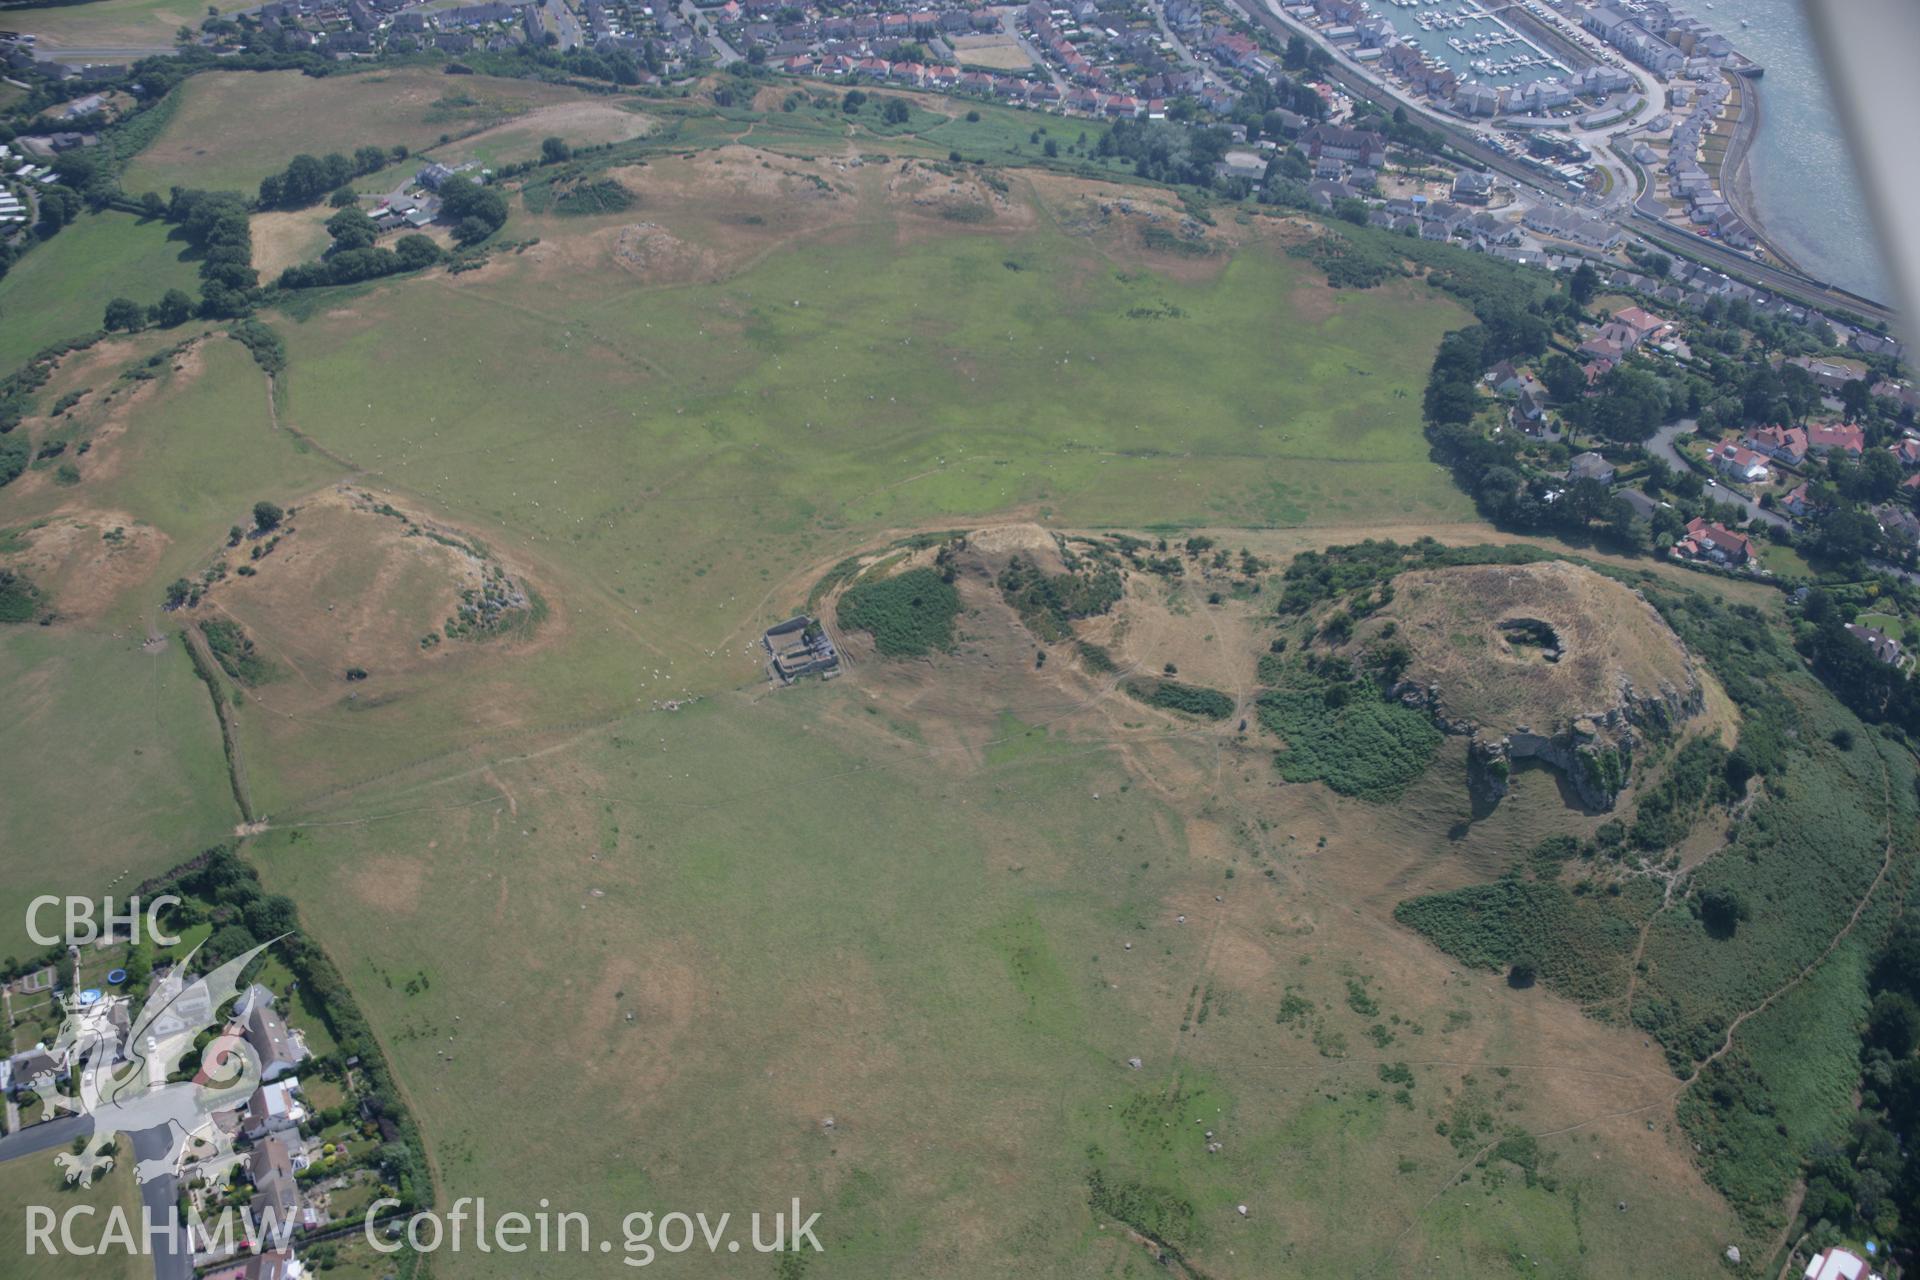 RCAHMW colour oblique aerial photograph of Deganwy Castle. Taken on 25 July 2006 by Toby Driver.